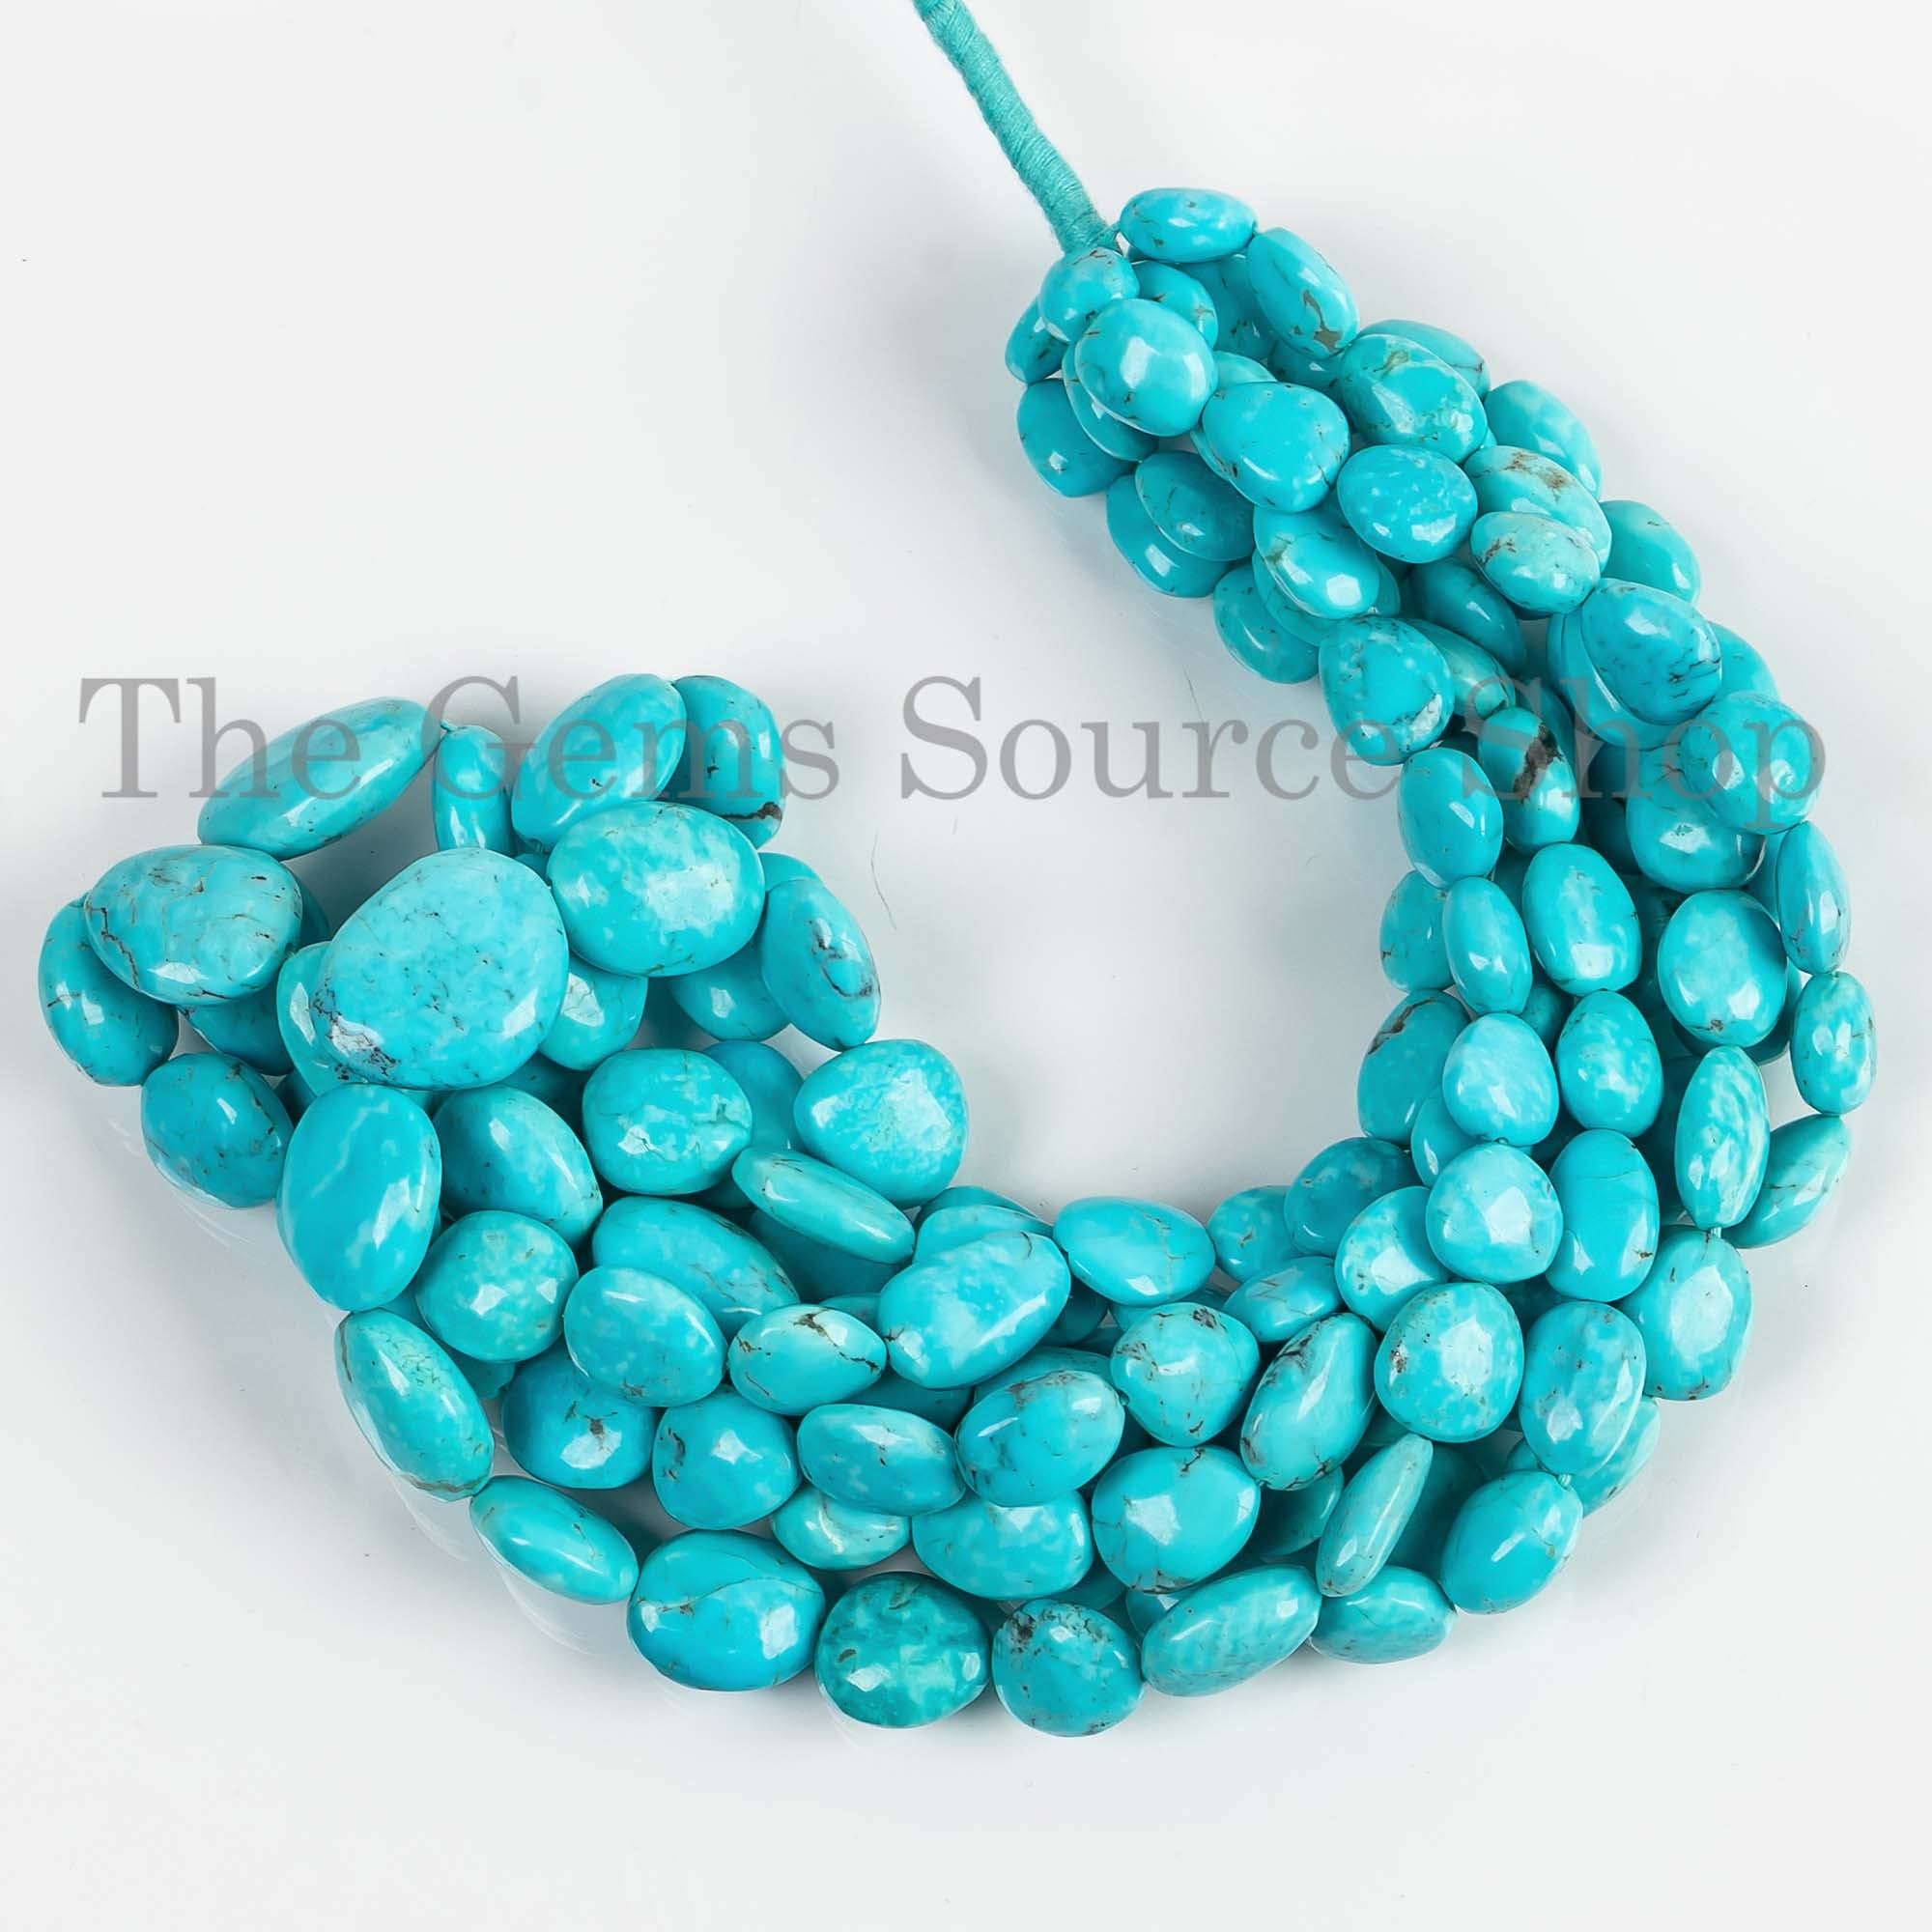 9x11-12x16mm Turquoise Smooth Nugget Beads, Turquoise Wholesale Beads, Turquoise Gemstone Beads, Fancy Nugget Beads For Jewelry